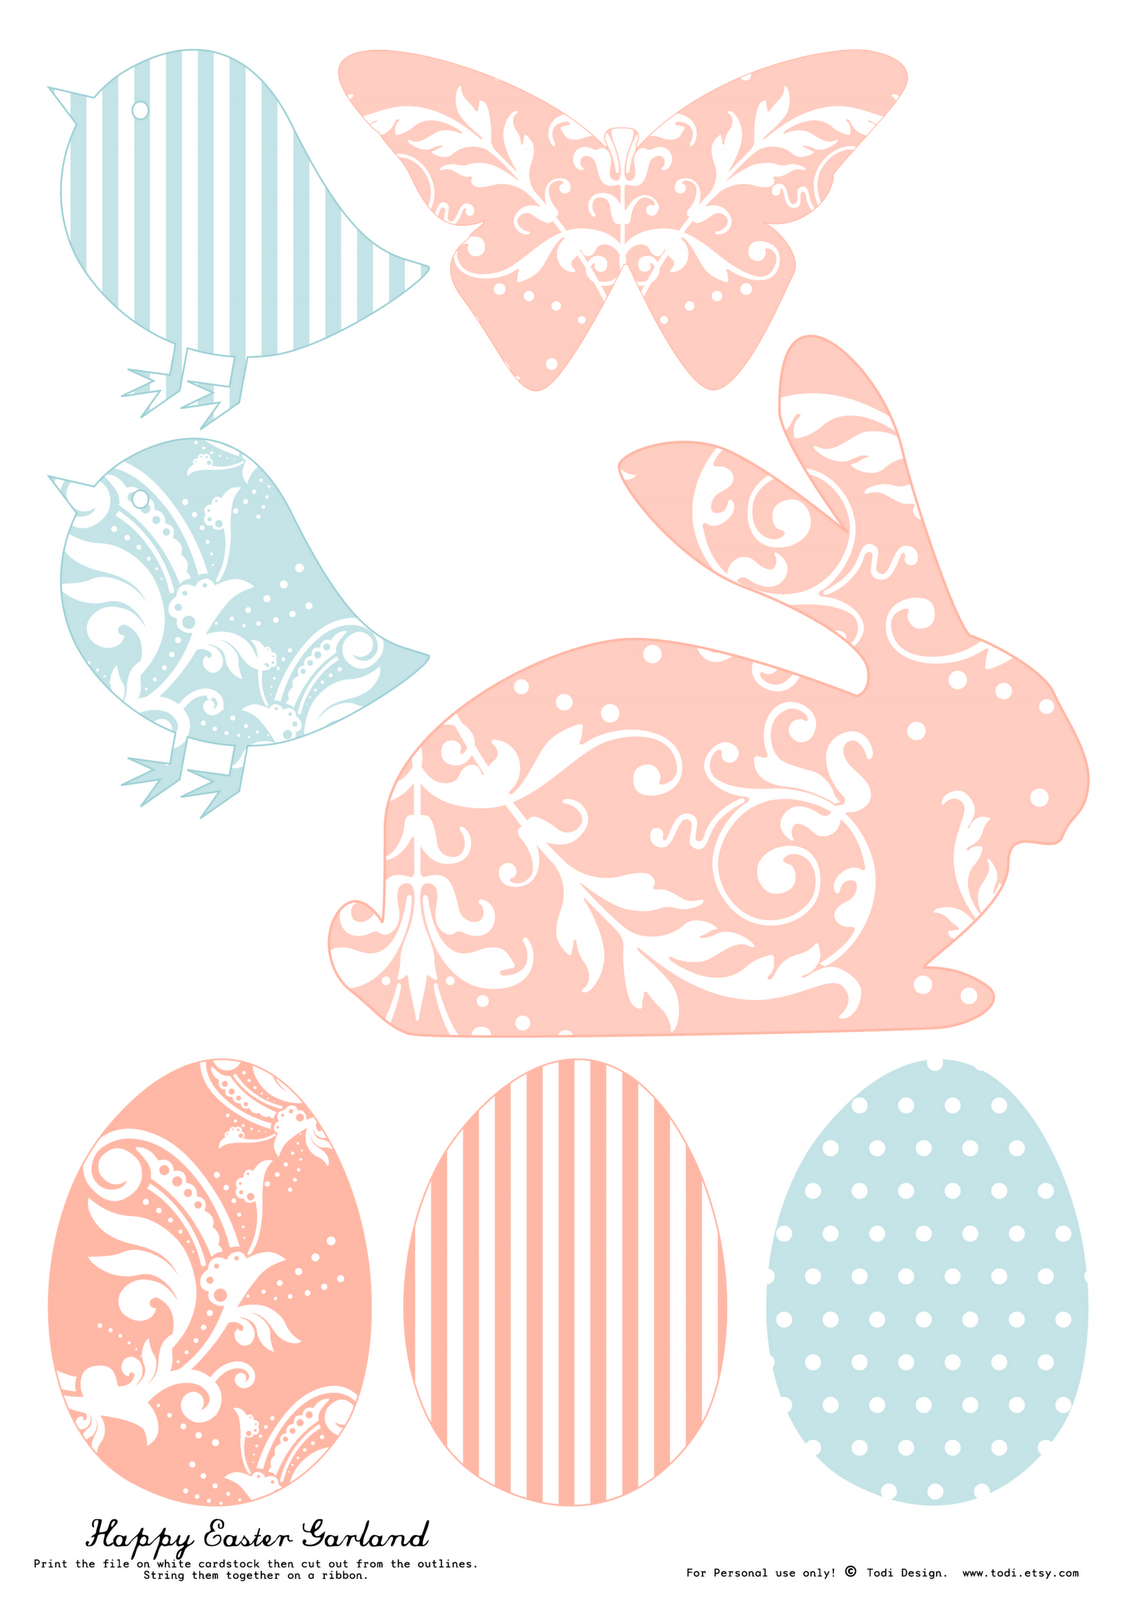 Todi: Free Printables For Easter Decoration. Th Print Used For This - Free Printable Easter Images